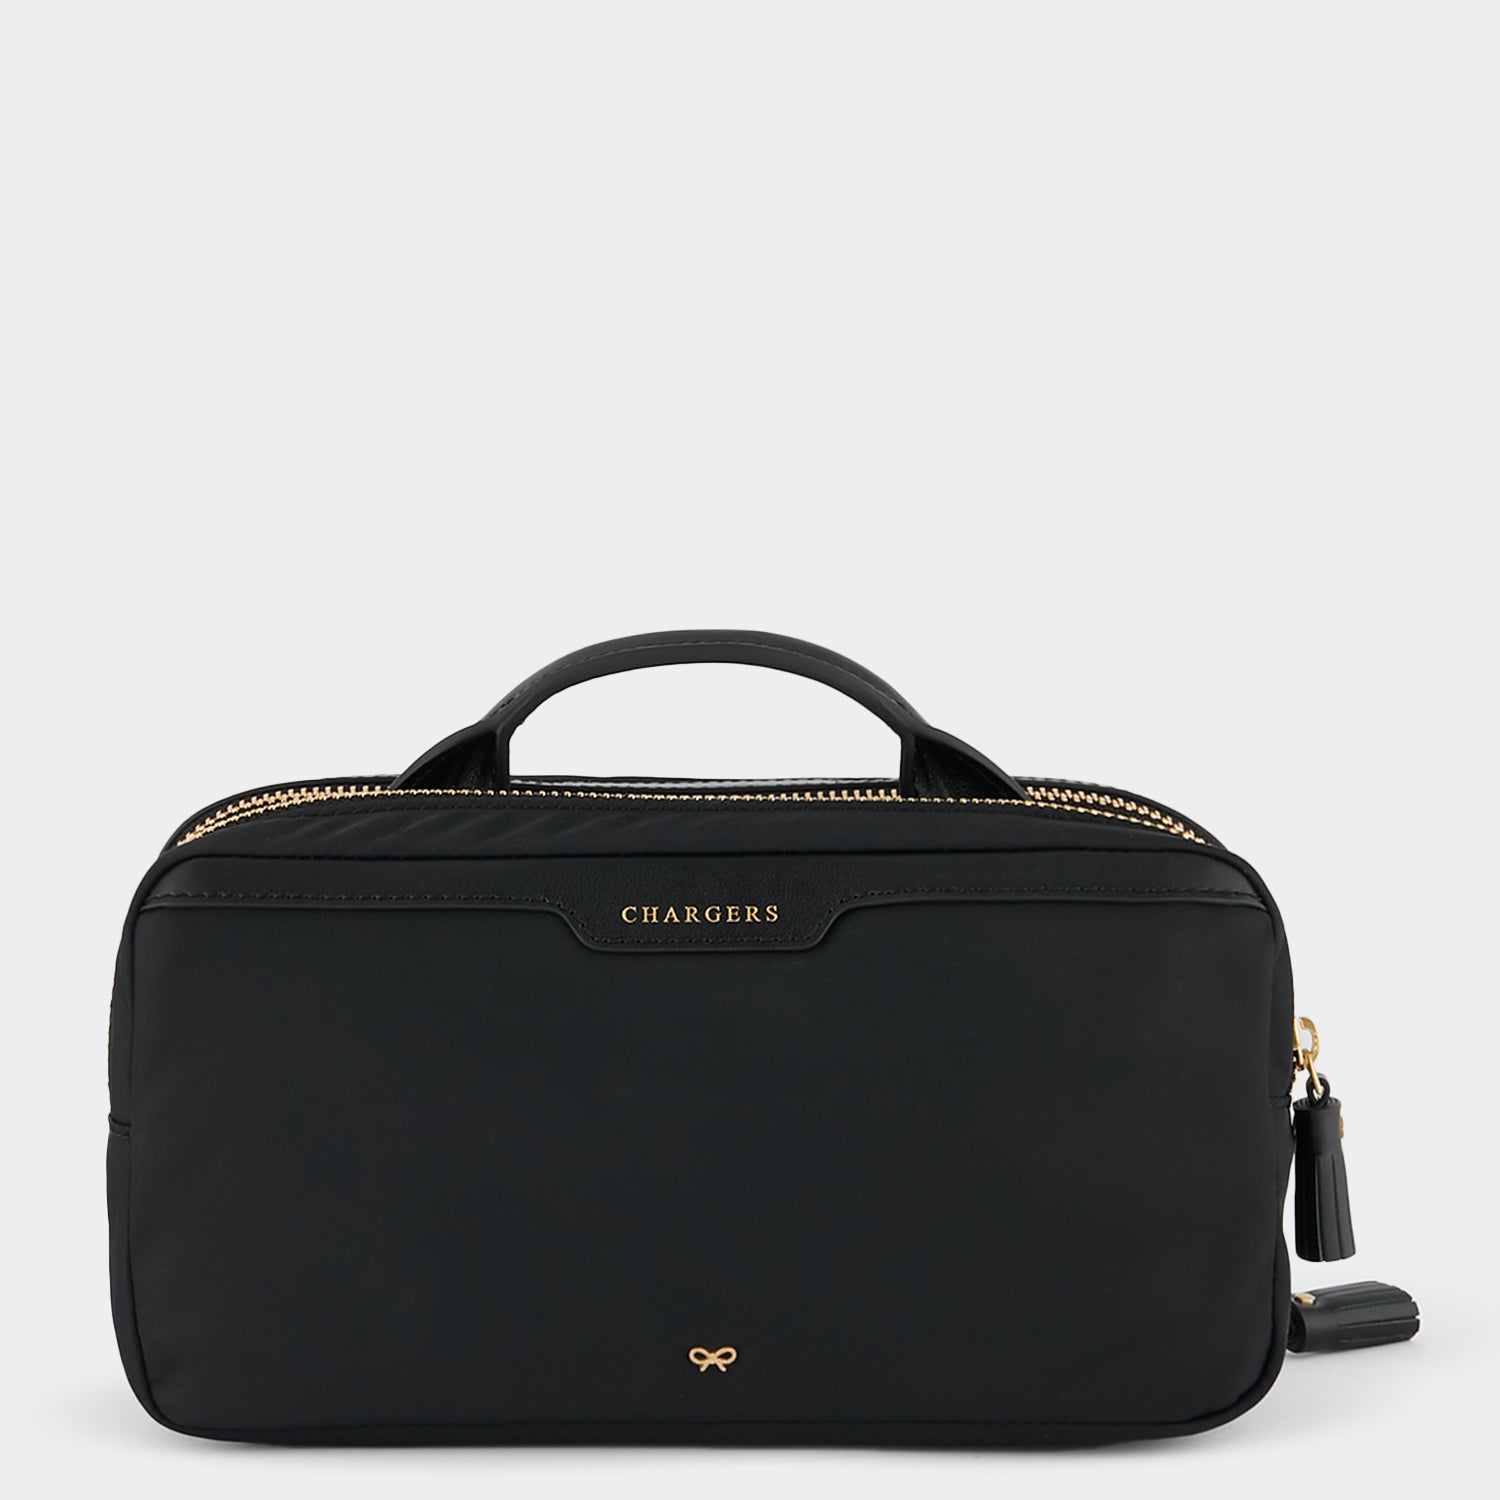 Home Office Pouch -

                  
                    ECONYL® Regenerated Nylon in Black -
                  

                  Anya Hindmarch EU
